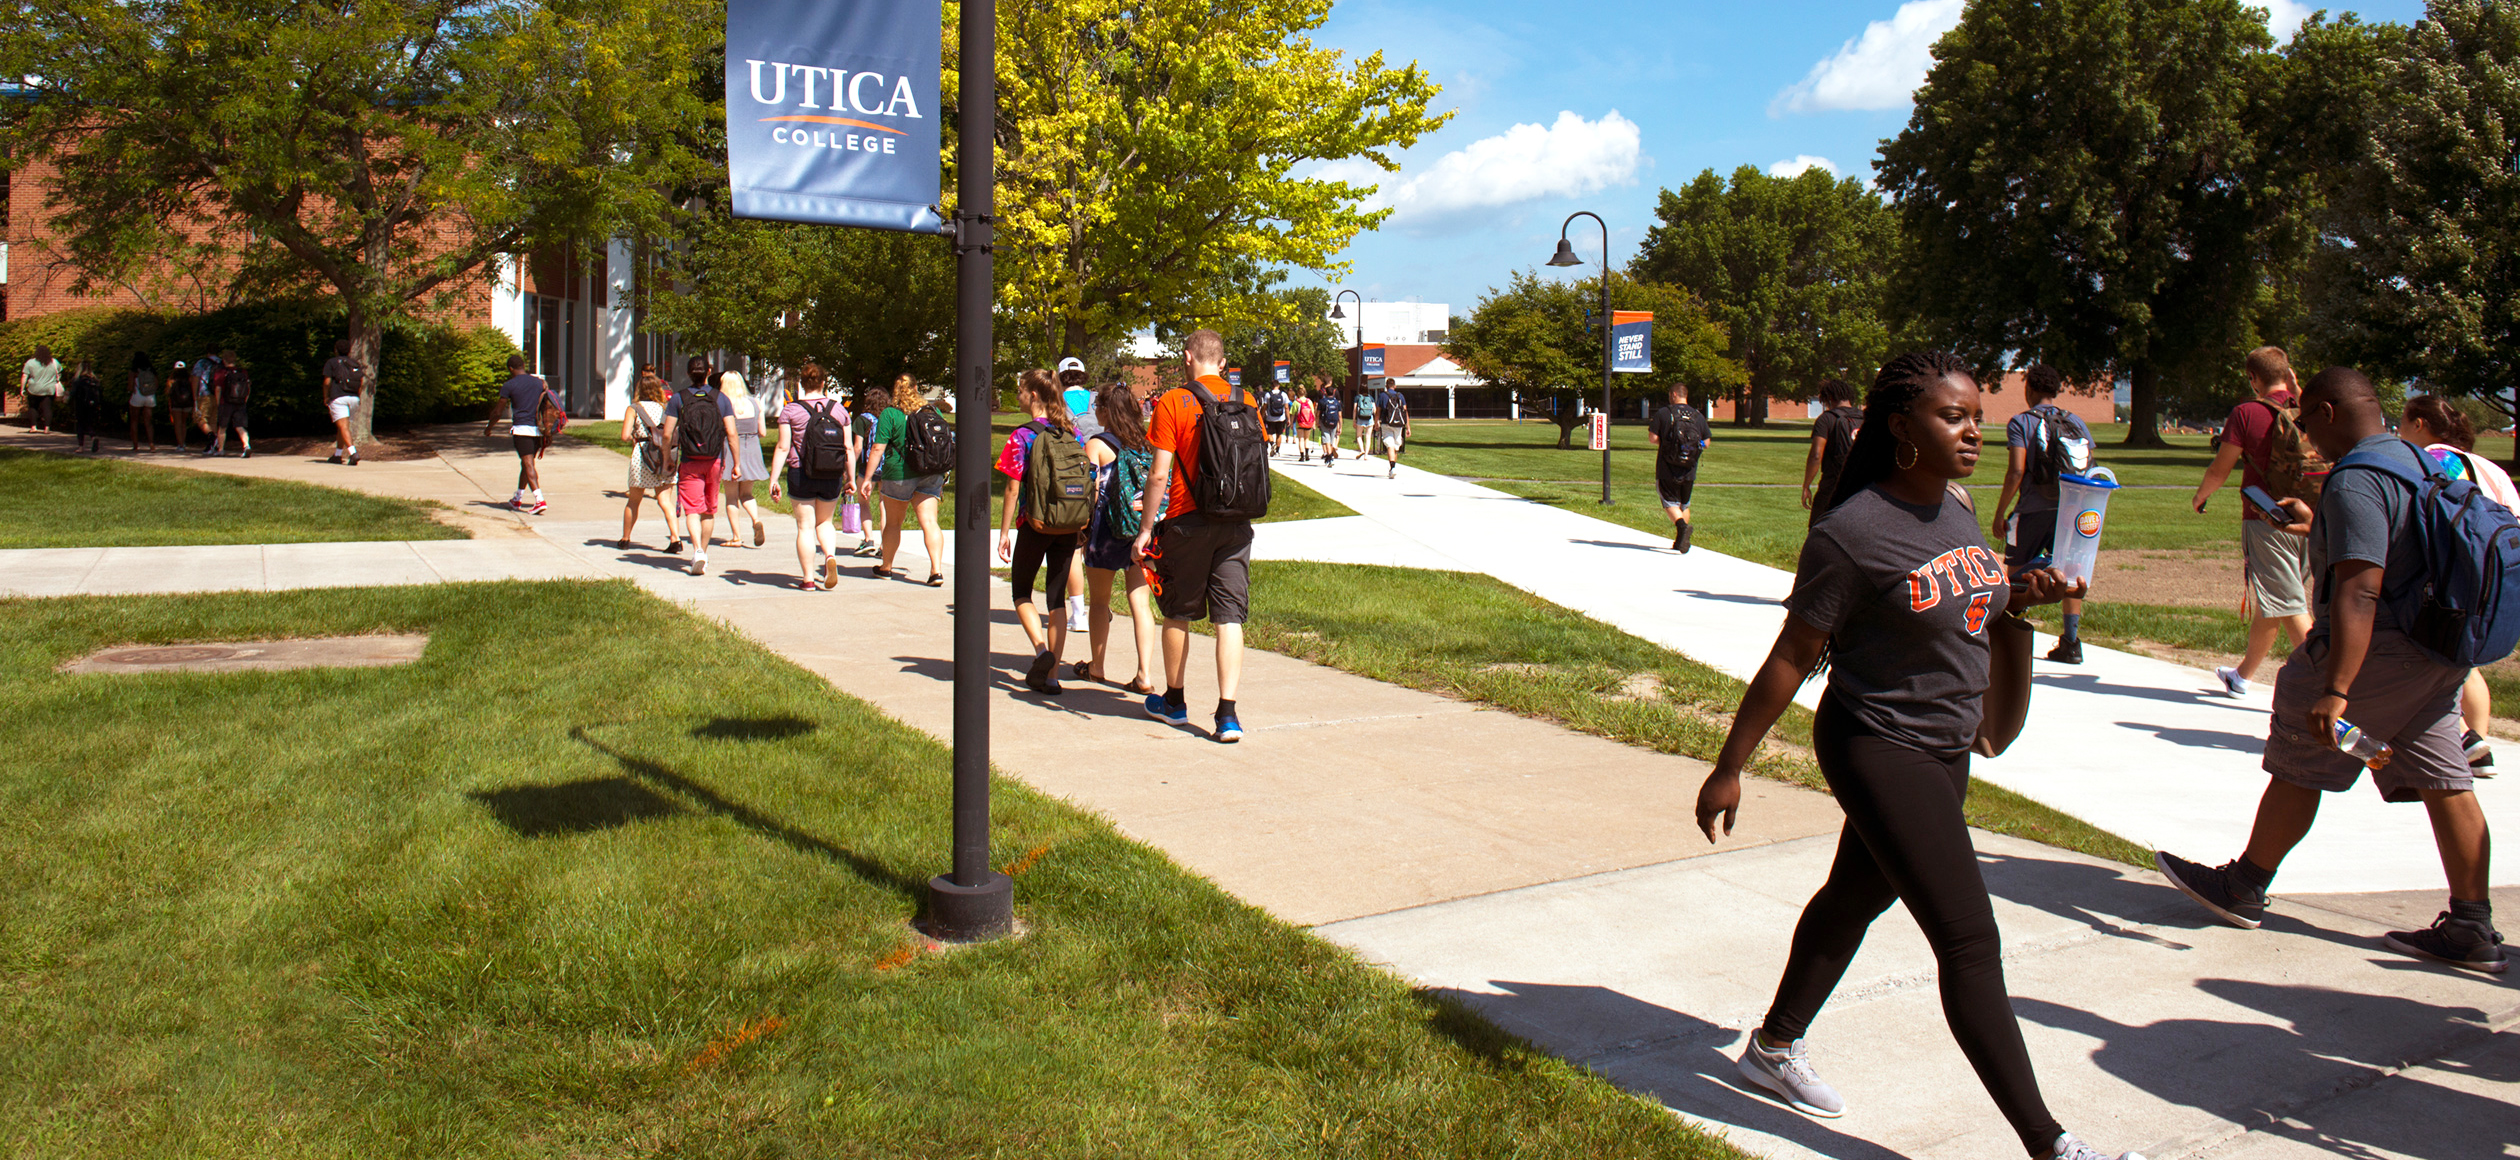 The Applied Ethics Institute at Utica University - Ethics & Public Policy Newsletter - May 2016